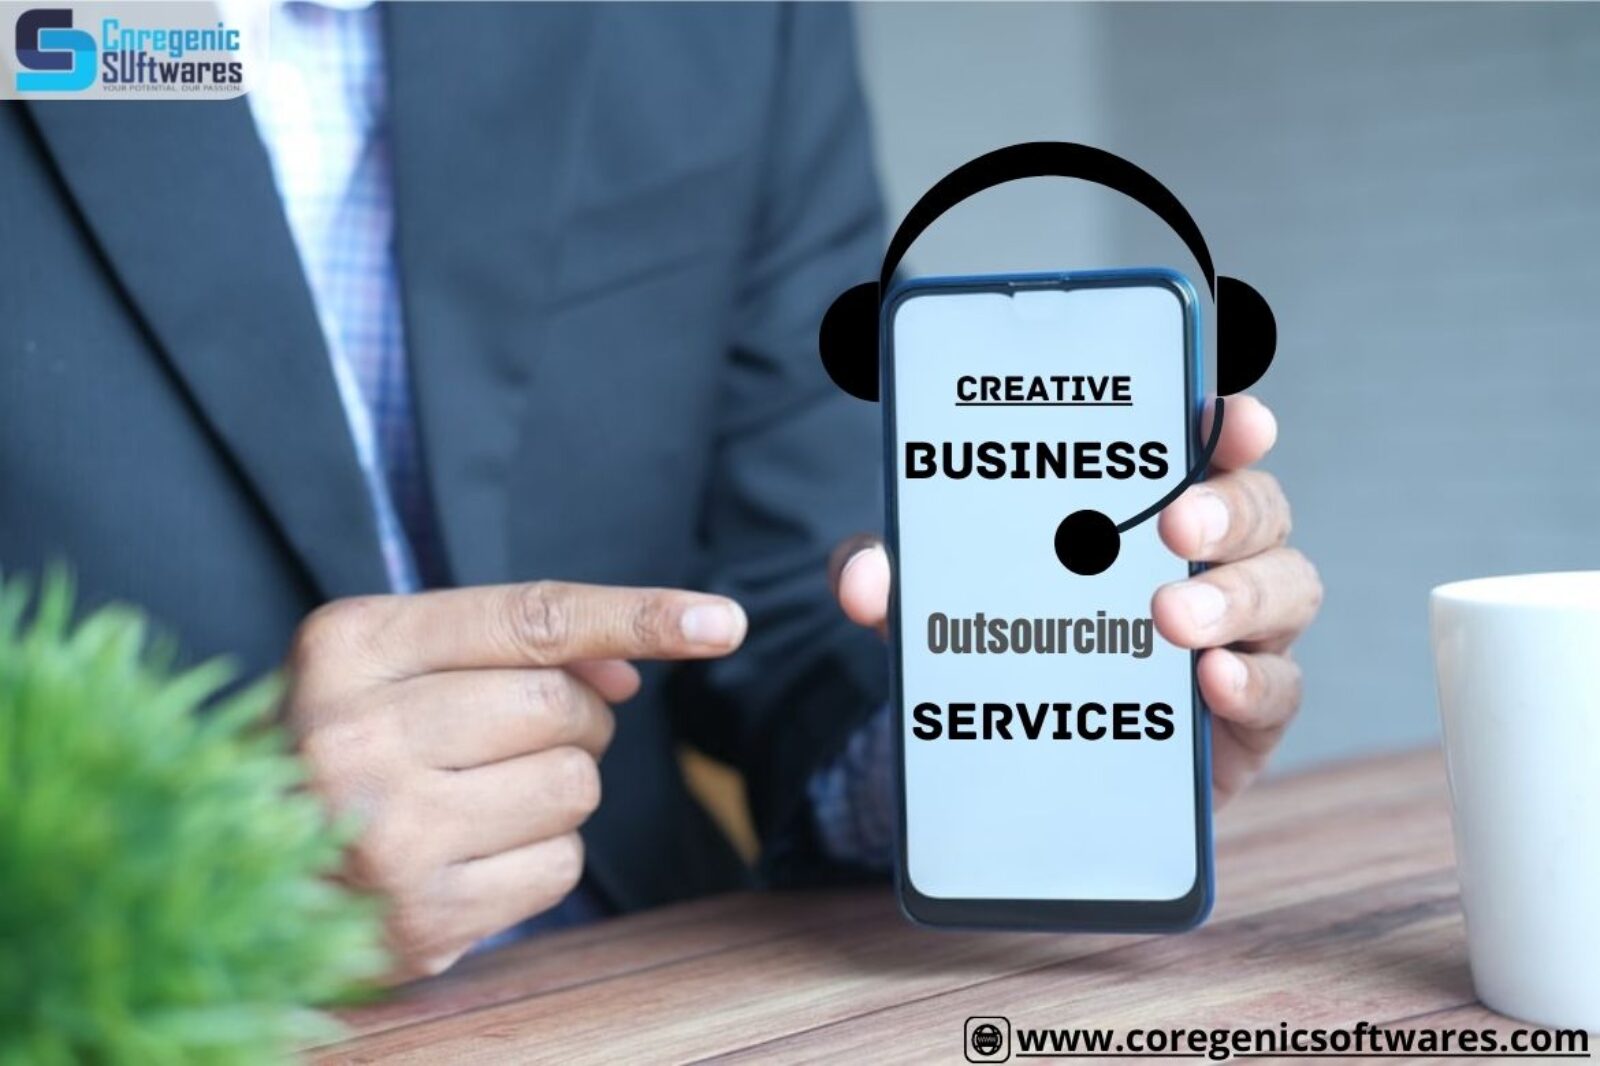 Creative Business Outsourcing Services